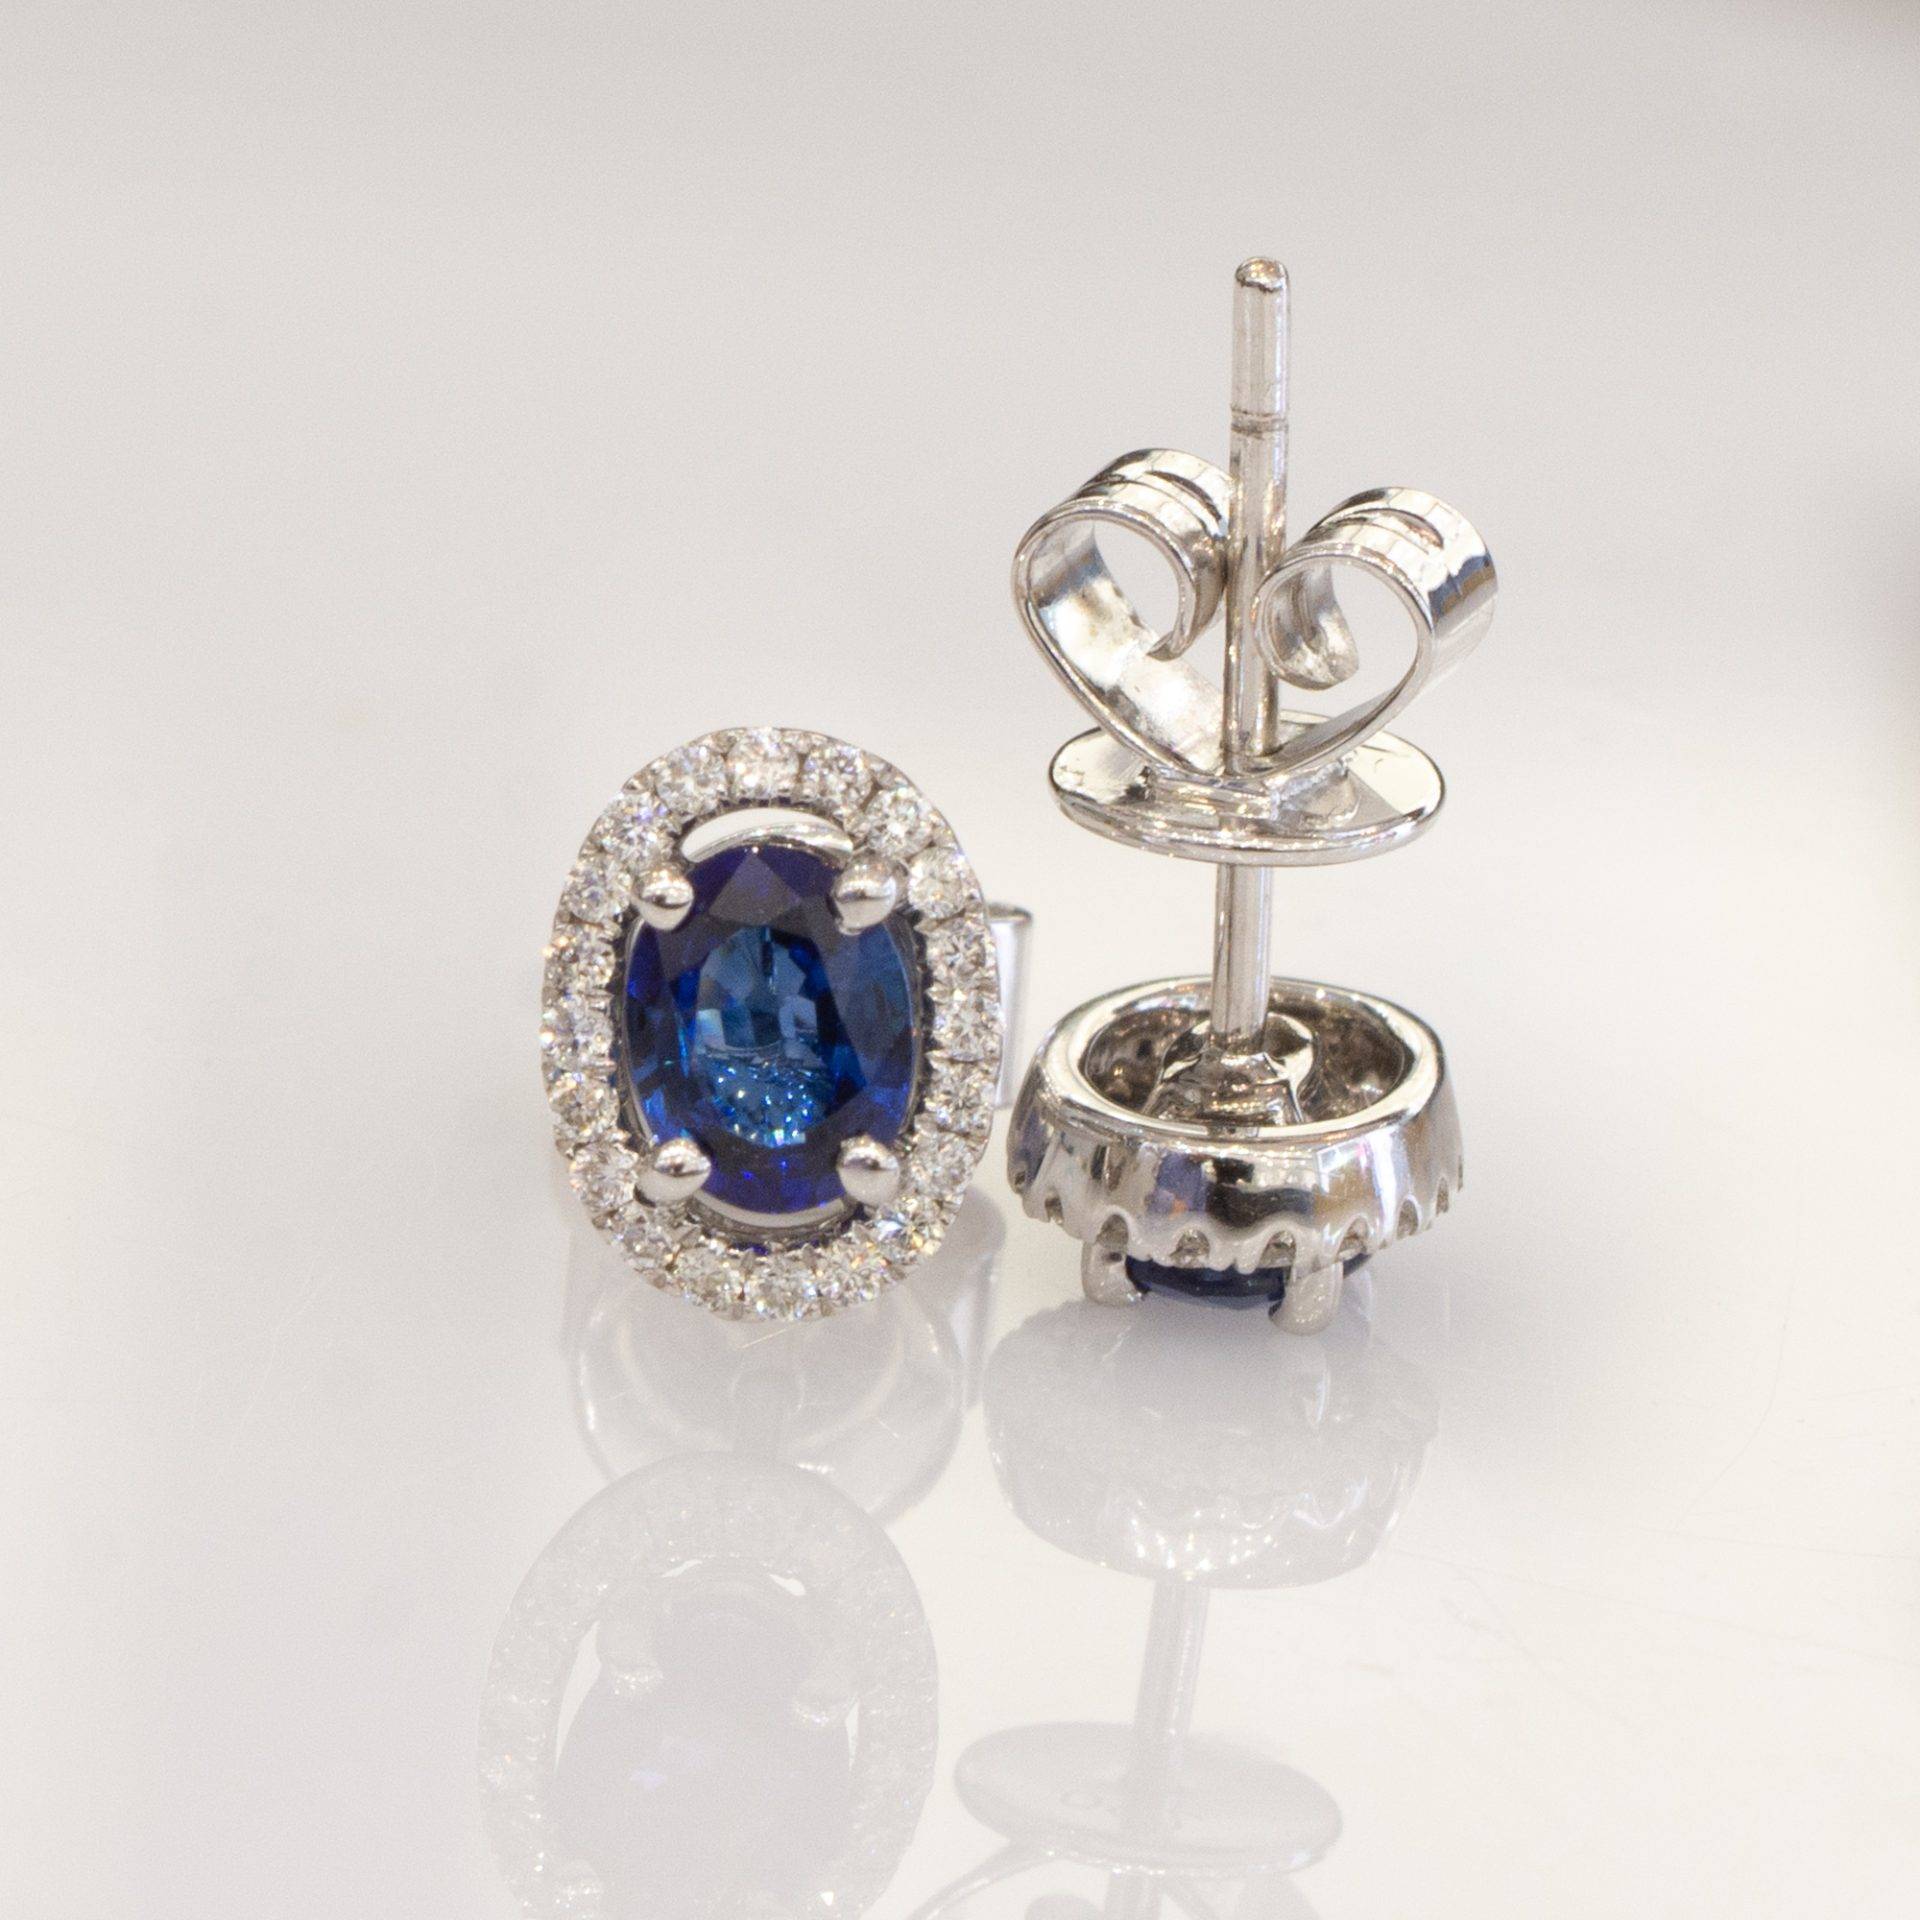 Sapphire and Diamond Halo Stud Earrings in 18K White Gold